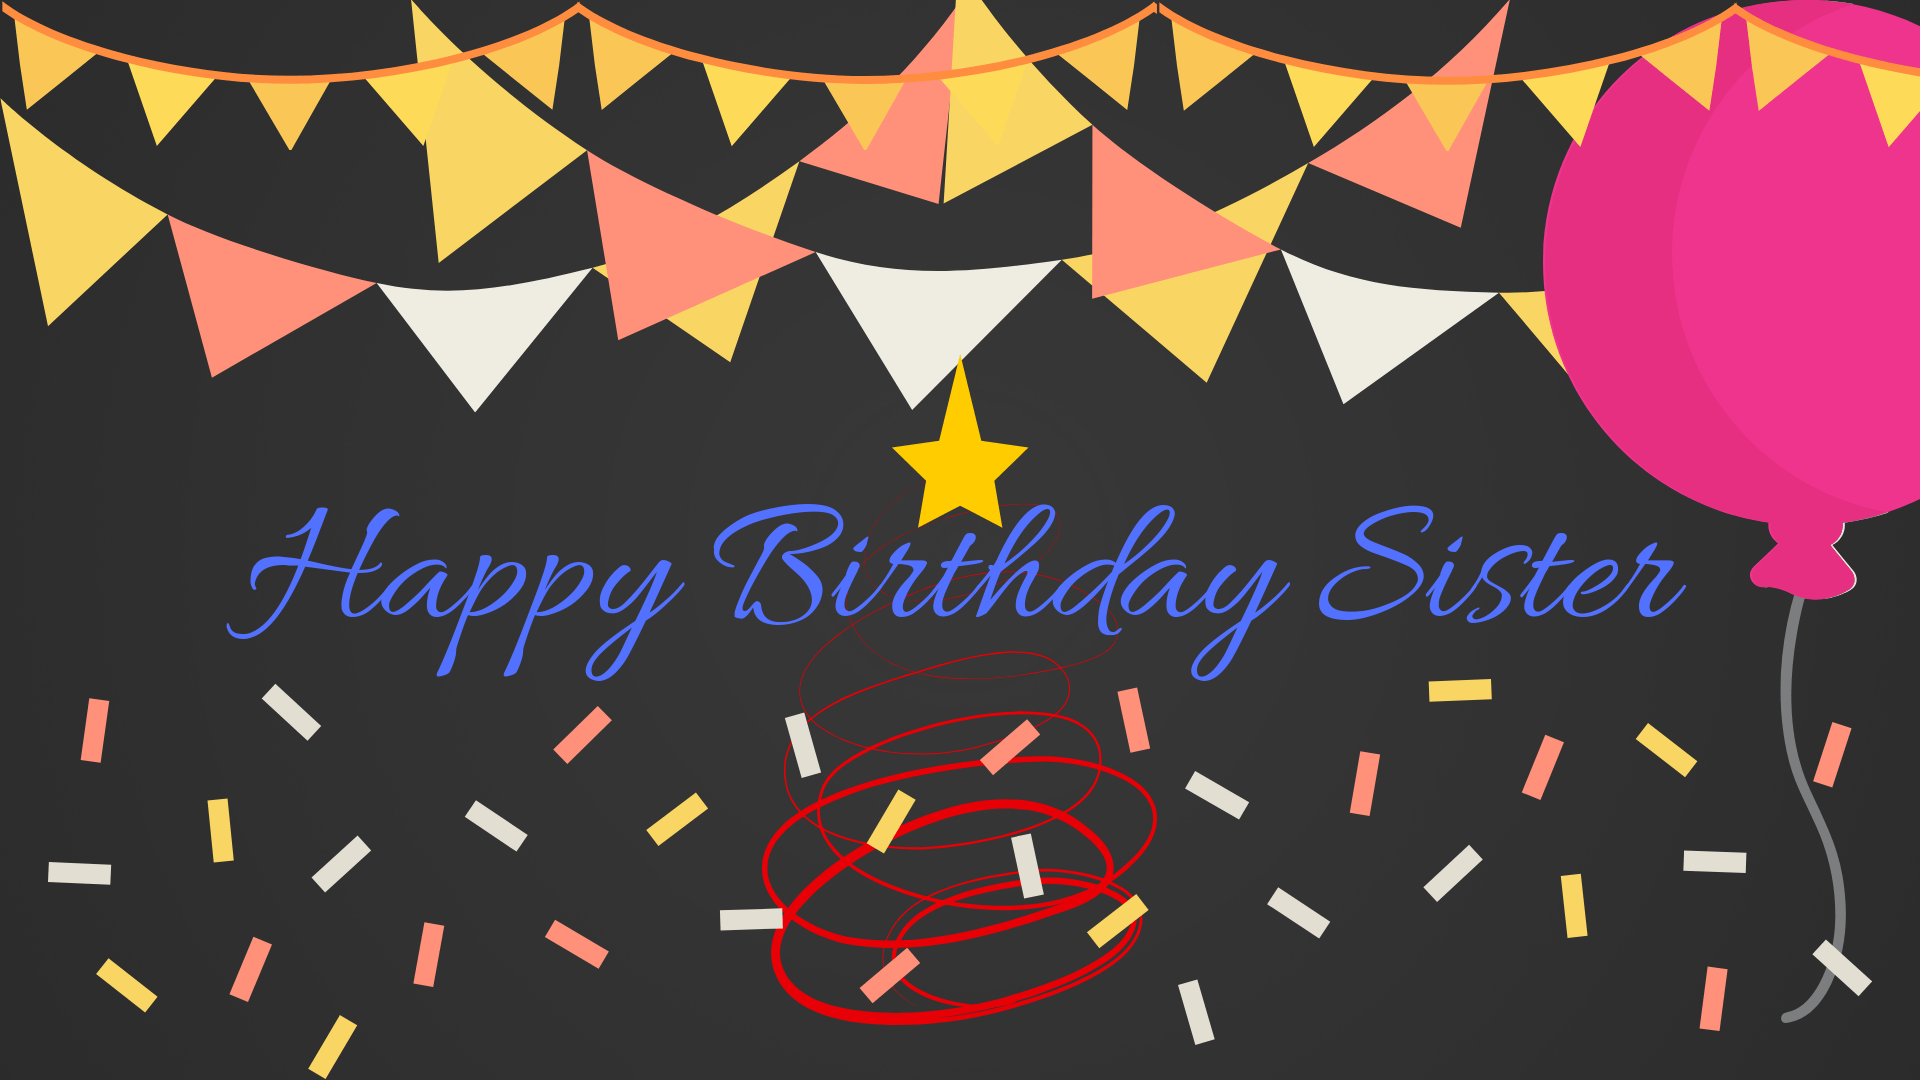 Happy Birthday Sister Wallpapers Hd Background Images Graphic Design 1920x1080 Wallpaper Teahub Io